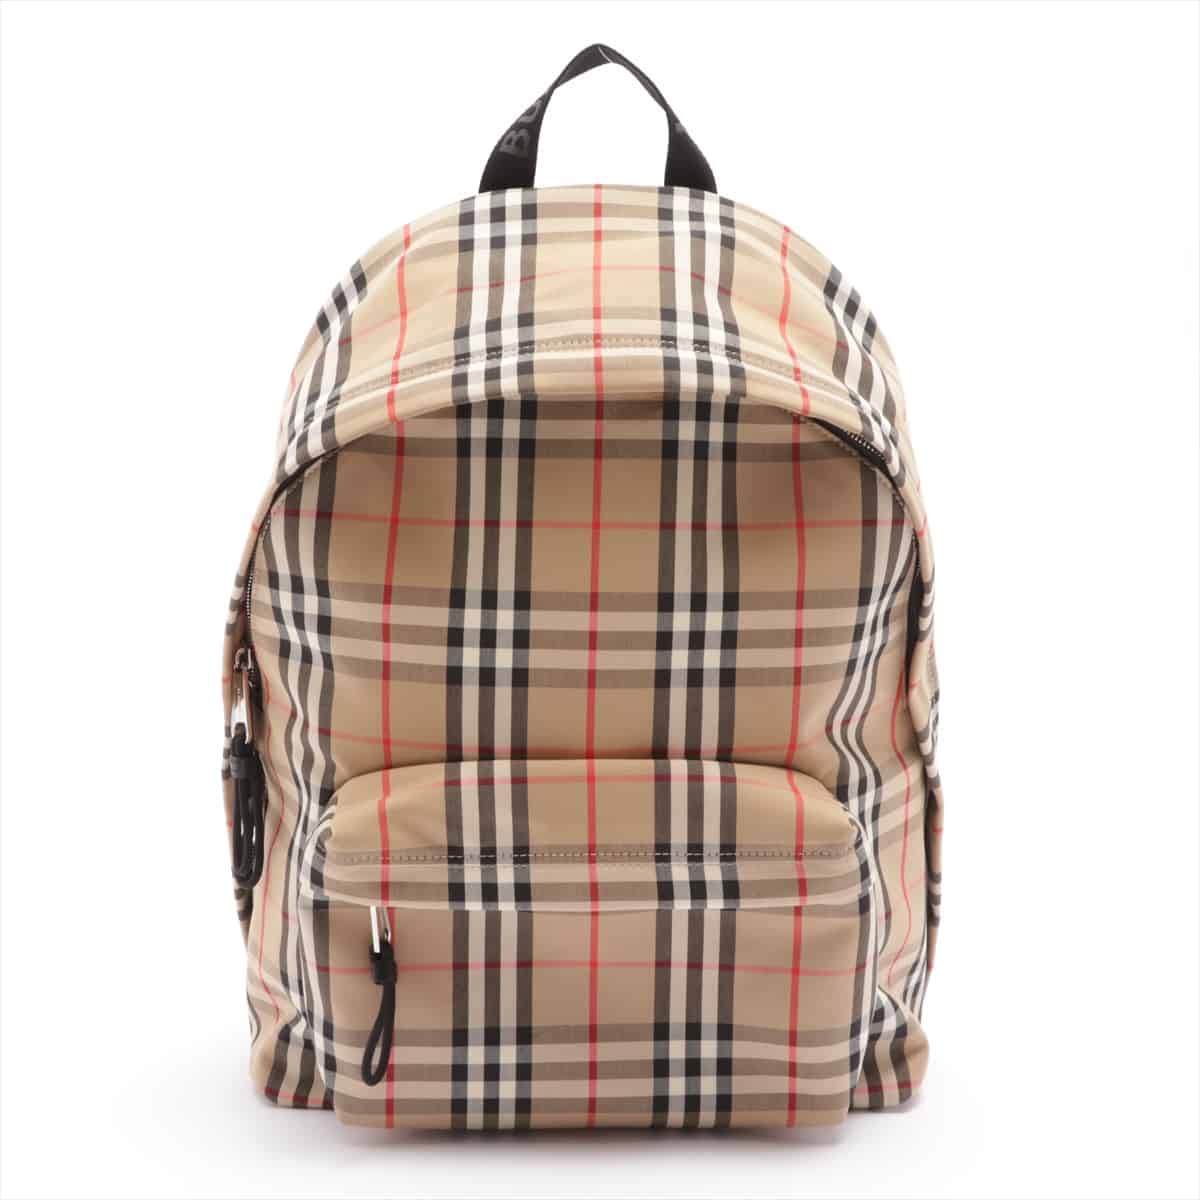 Burberry Canvas & leather Backpack Beige